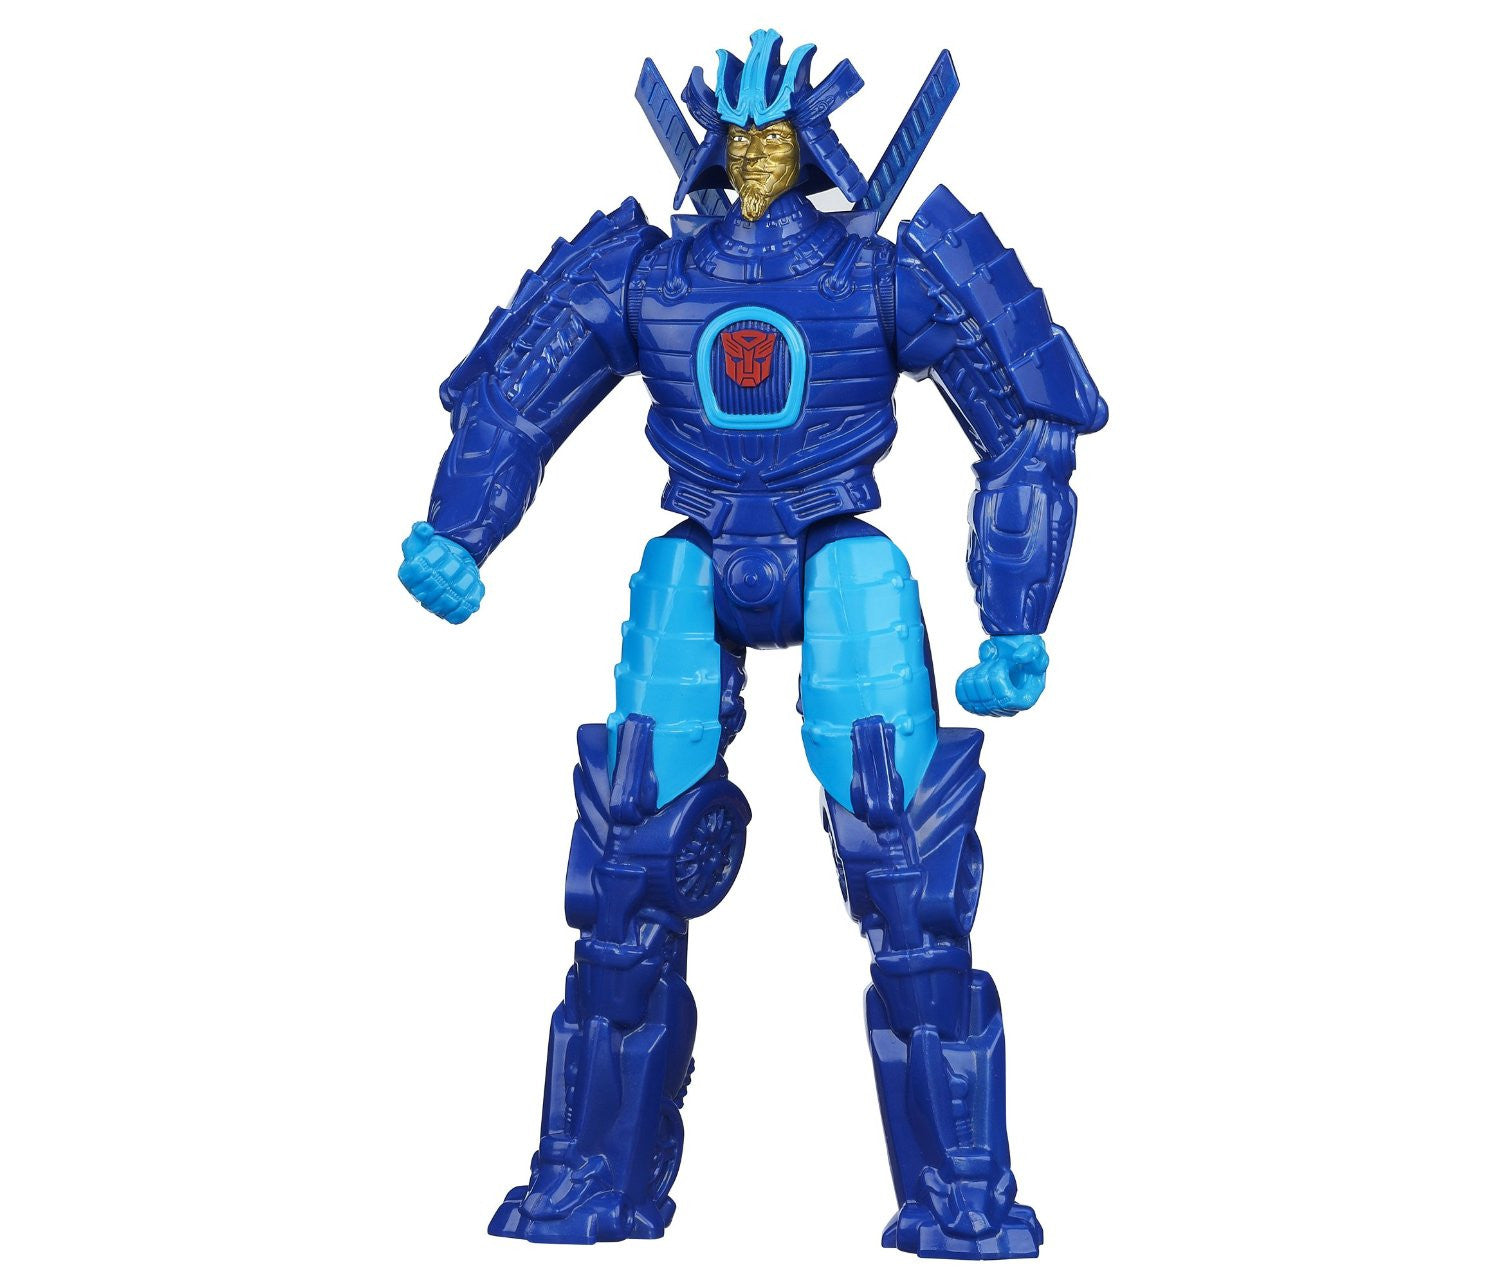 Transformers Age of Extinction Autobot Drift 12-Inch Figure